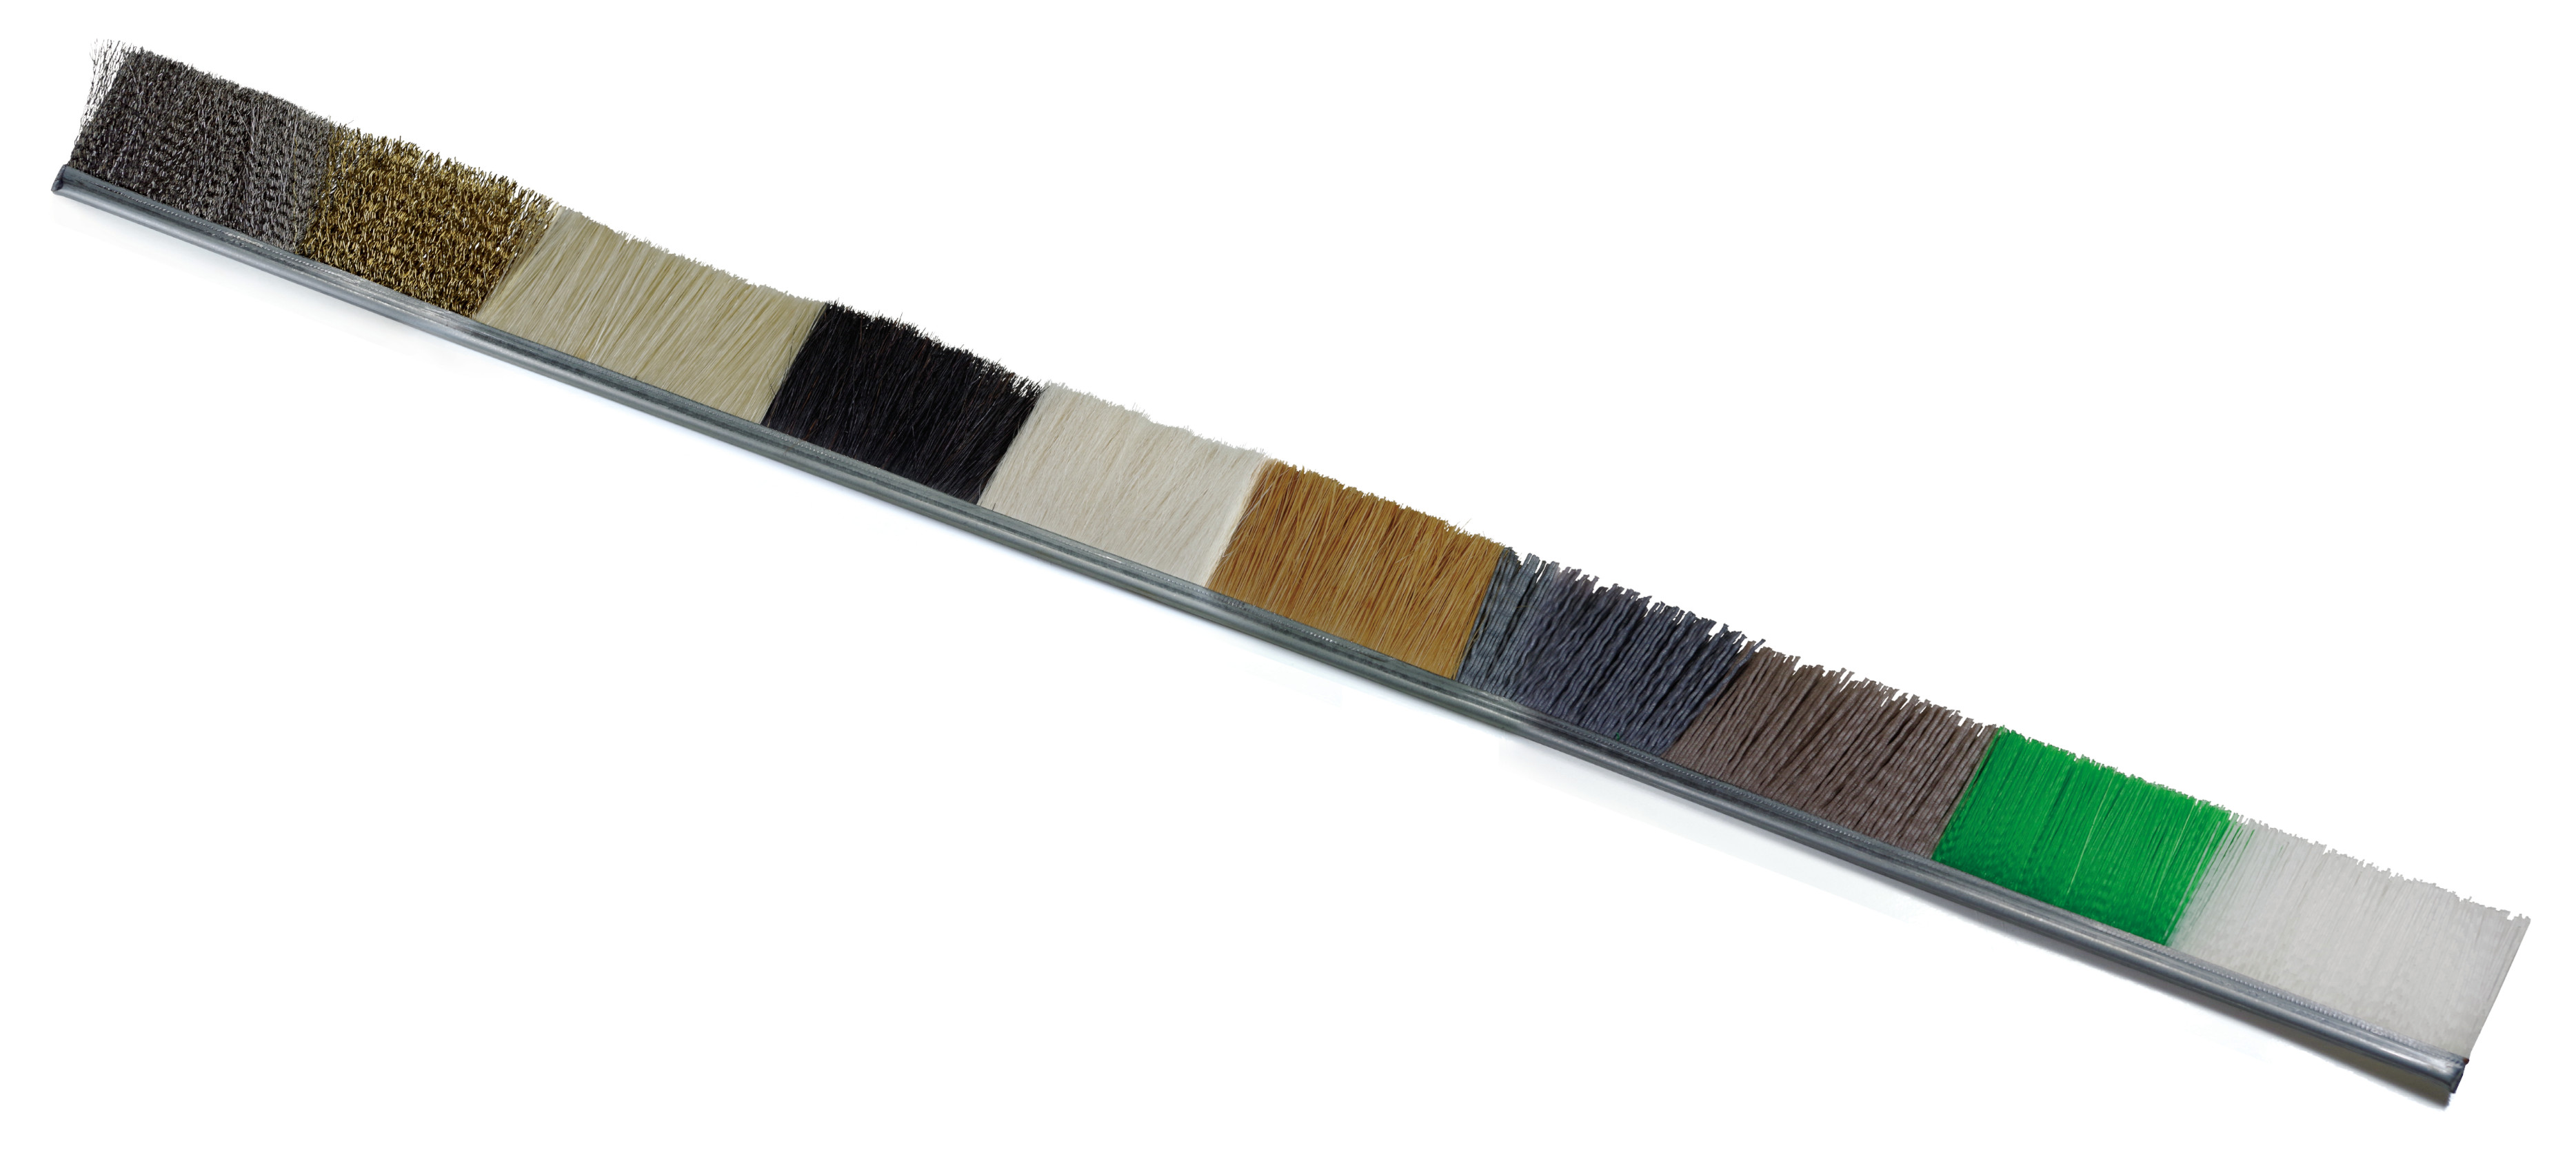 UNION STRIP BRUSH SERIES Variety of strip brushes in various widths and sizes